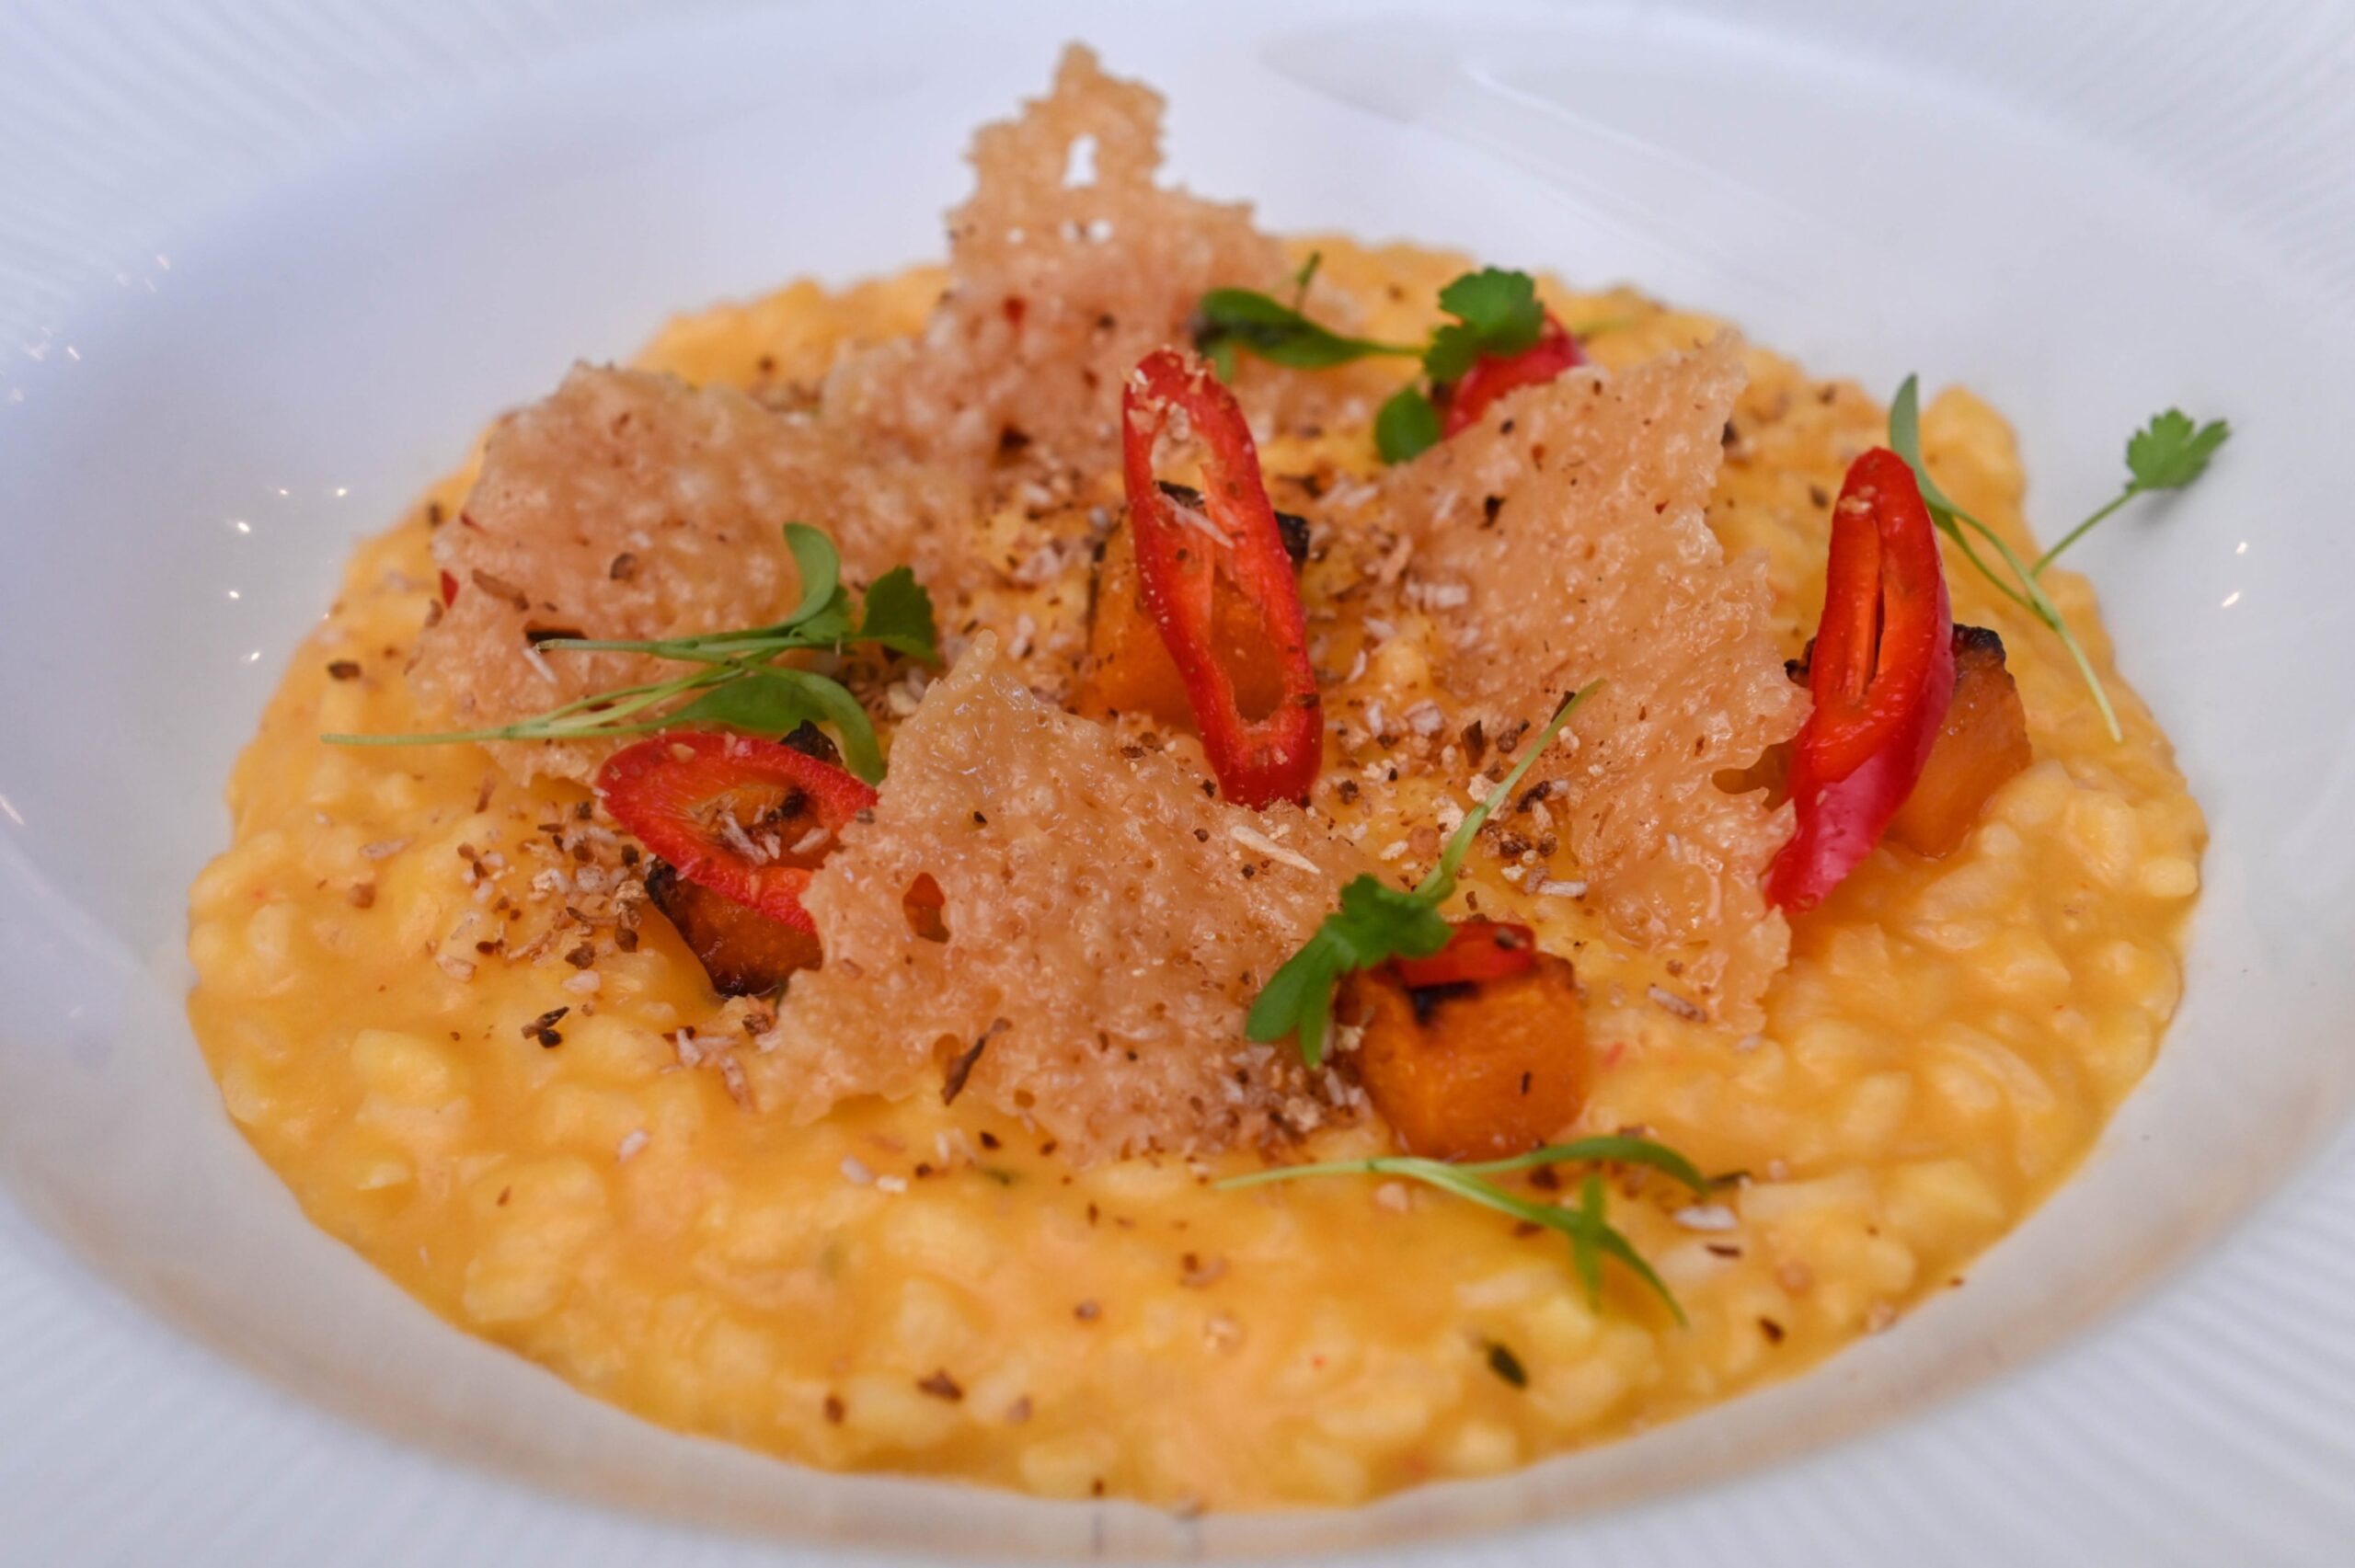 Risotto at Thainstone House.